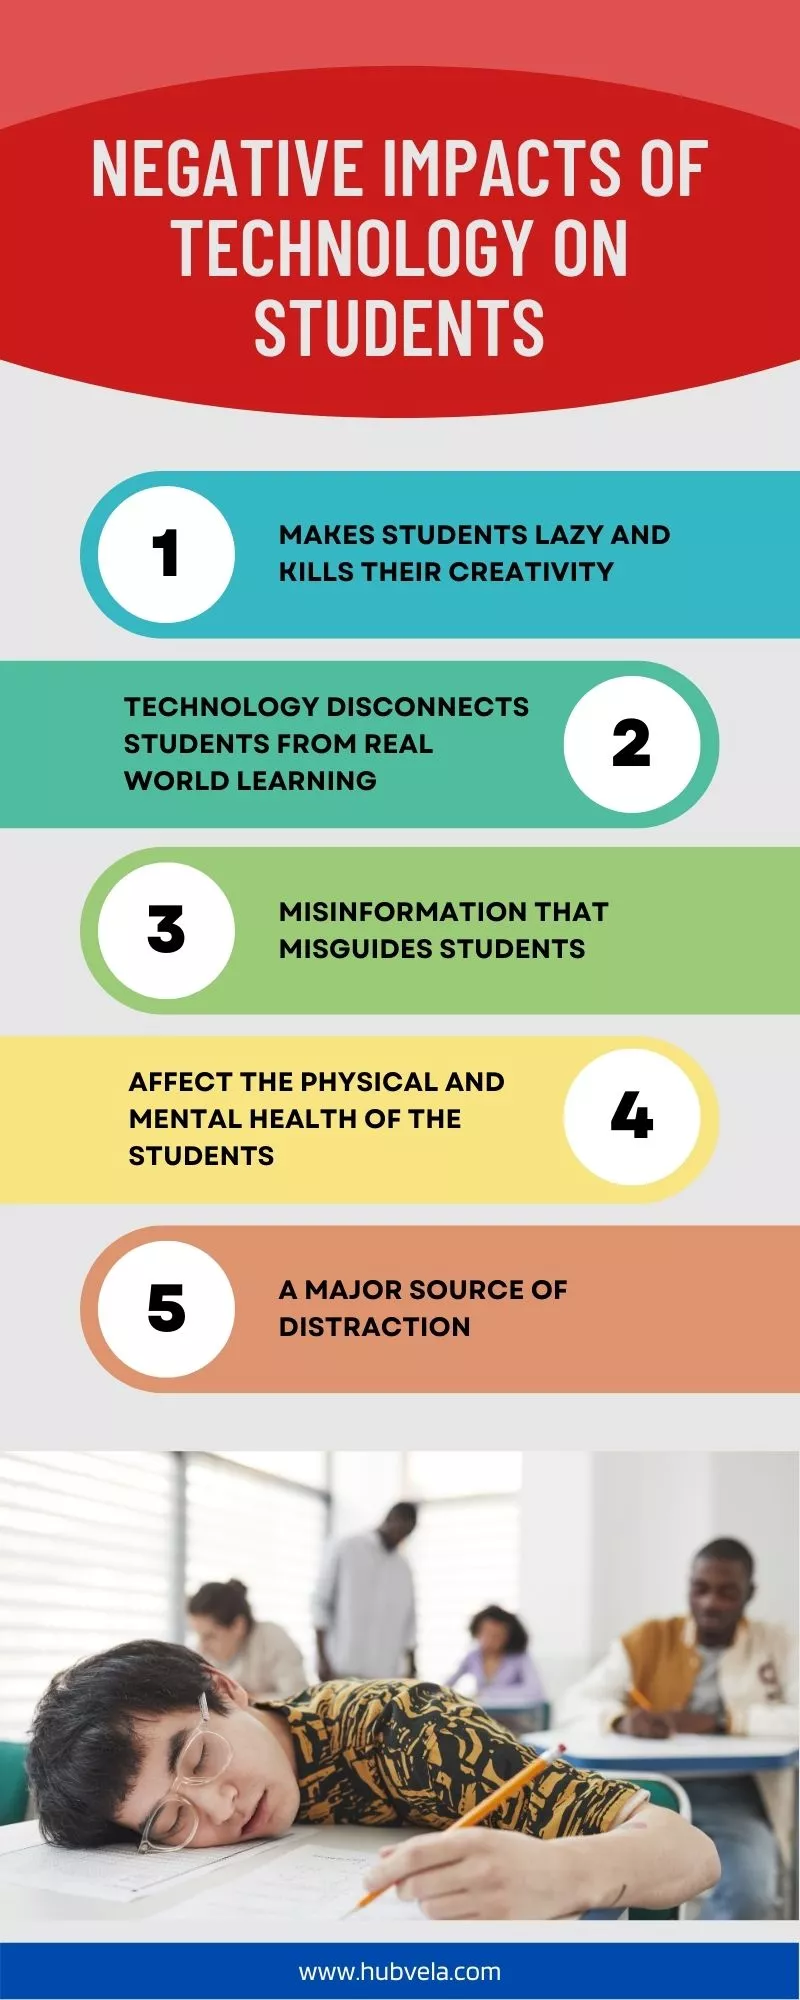 Negative Impacts of Technology on Students infographic